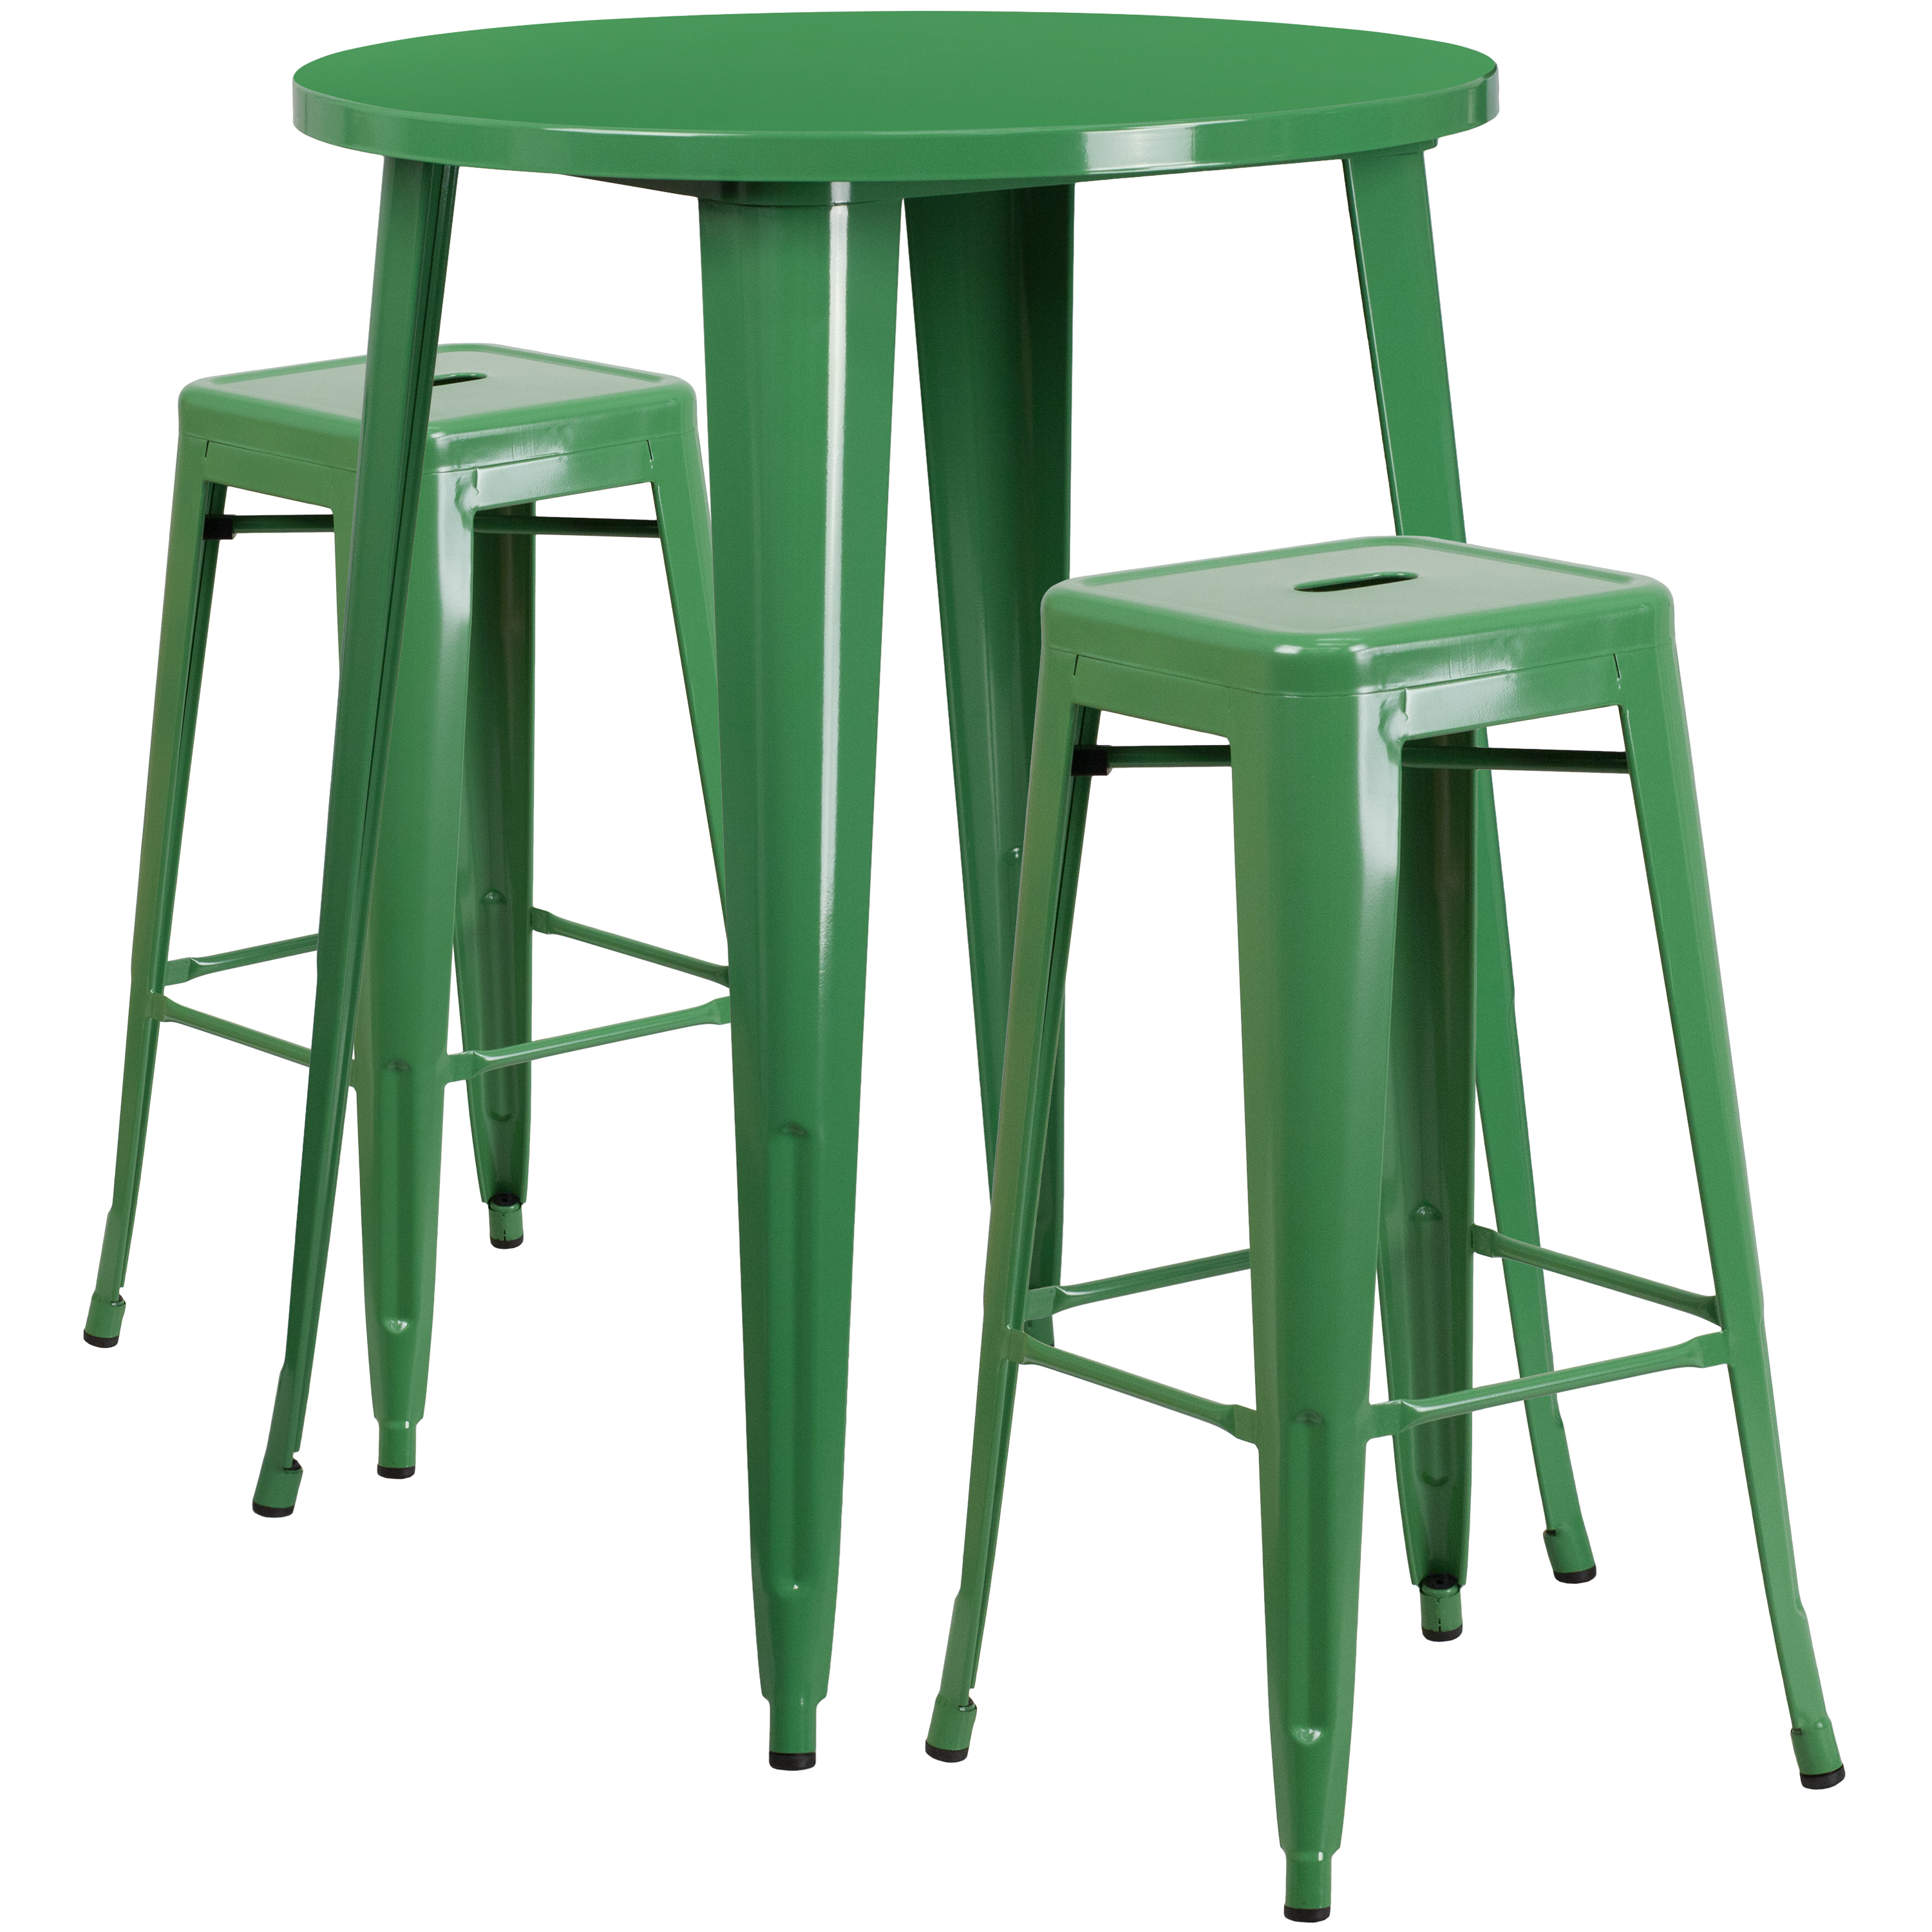 Flash Furniture Commercial Grade 30" Round Green Metal Indoor-Outdoor Bar Table Set with 2 Square Seat Backless Stools - image 1 of 5